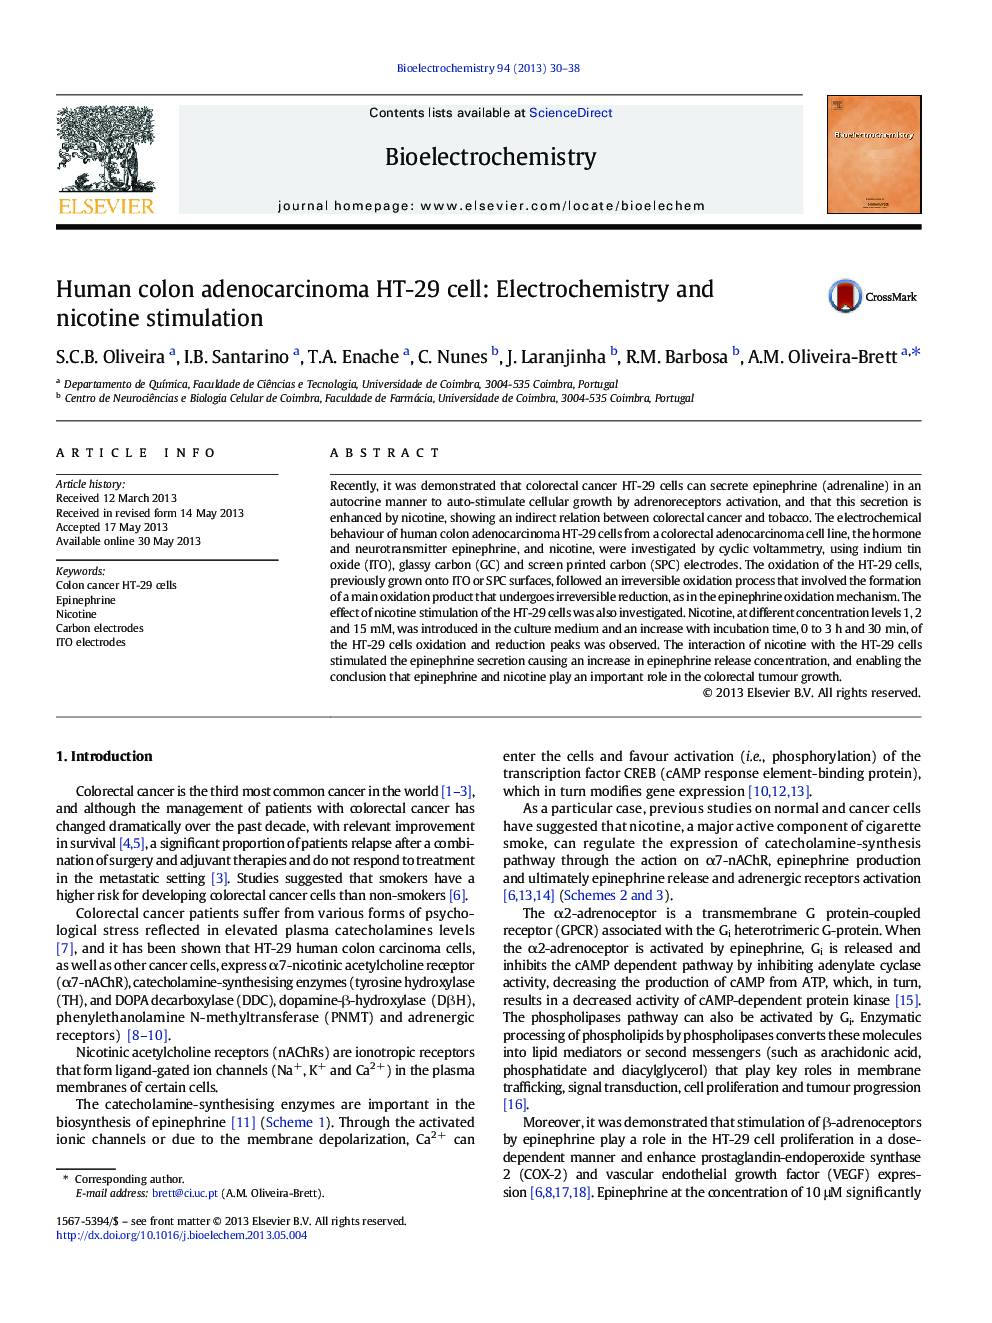 Human colon adenocarcinoma HT-29 cell: Electrochemistry and nicotine stimulation